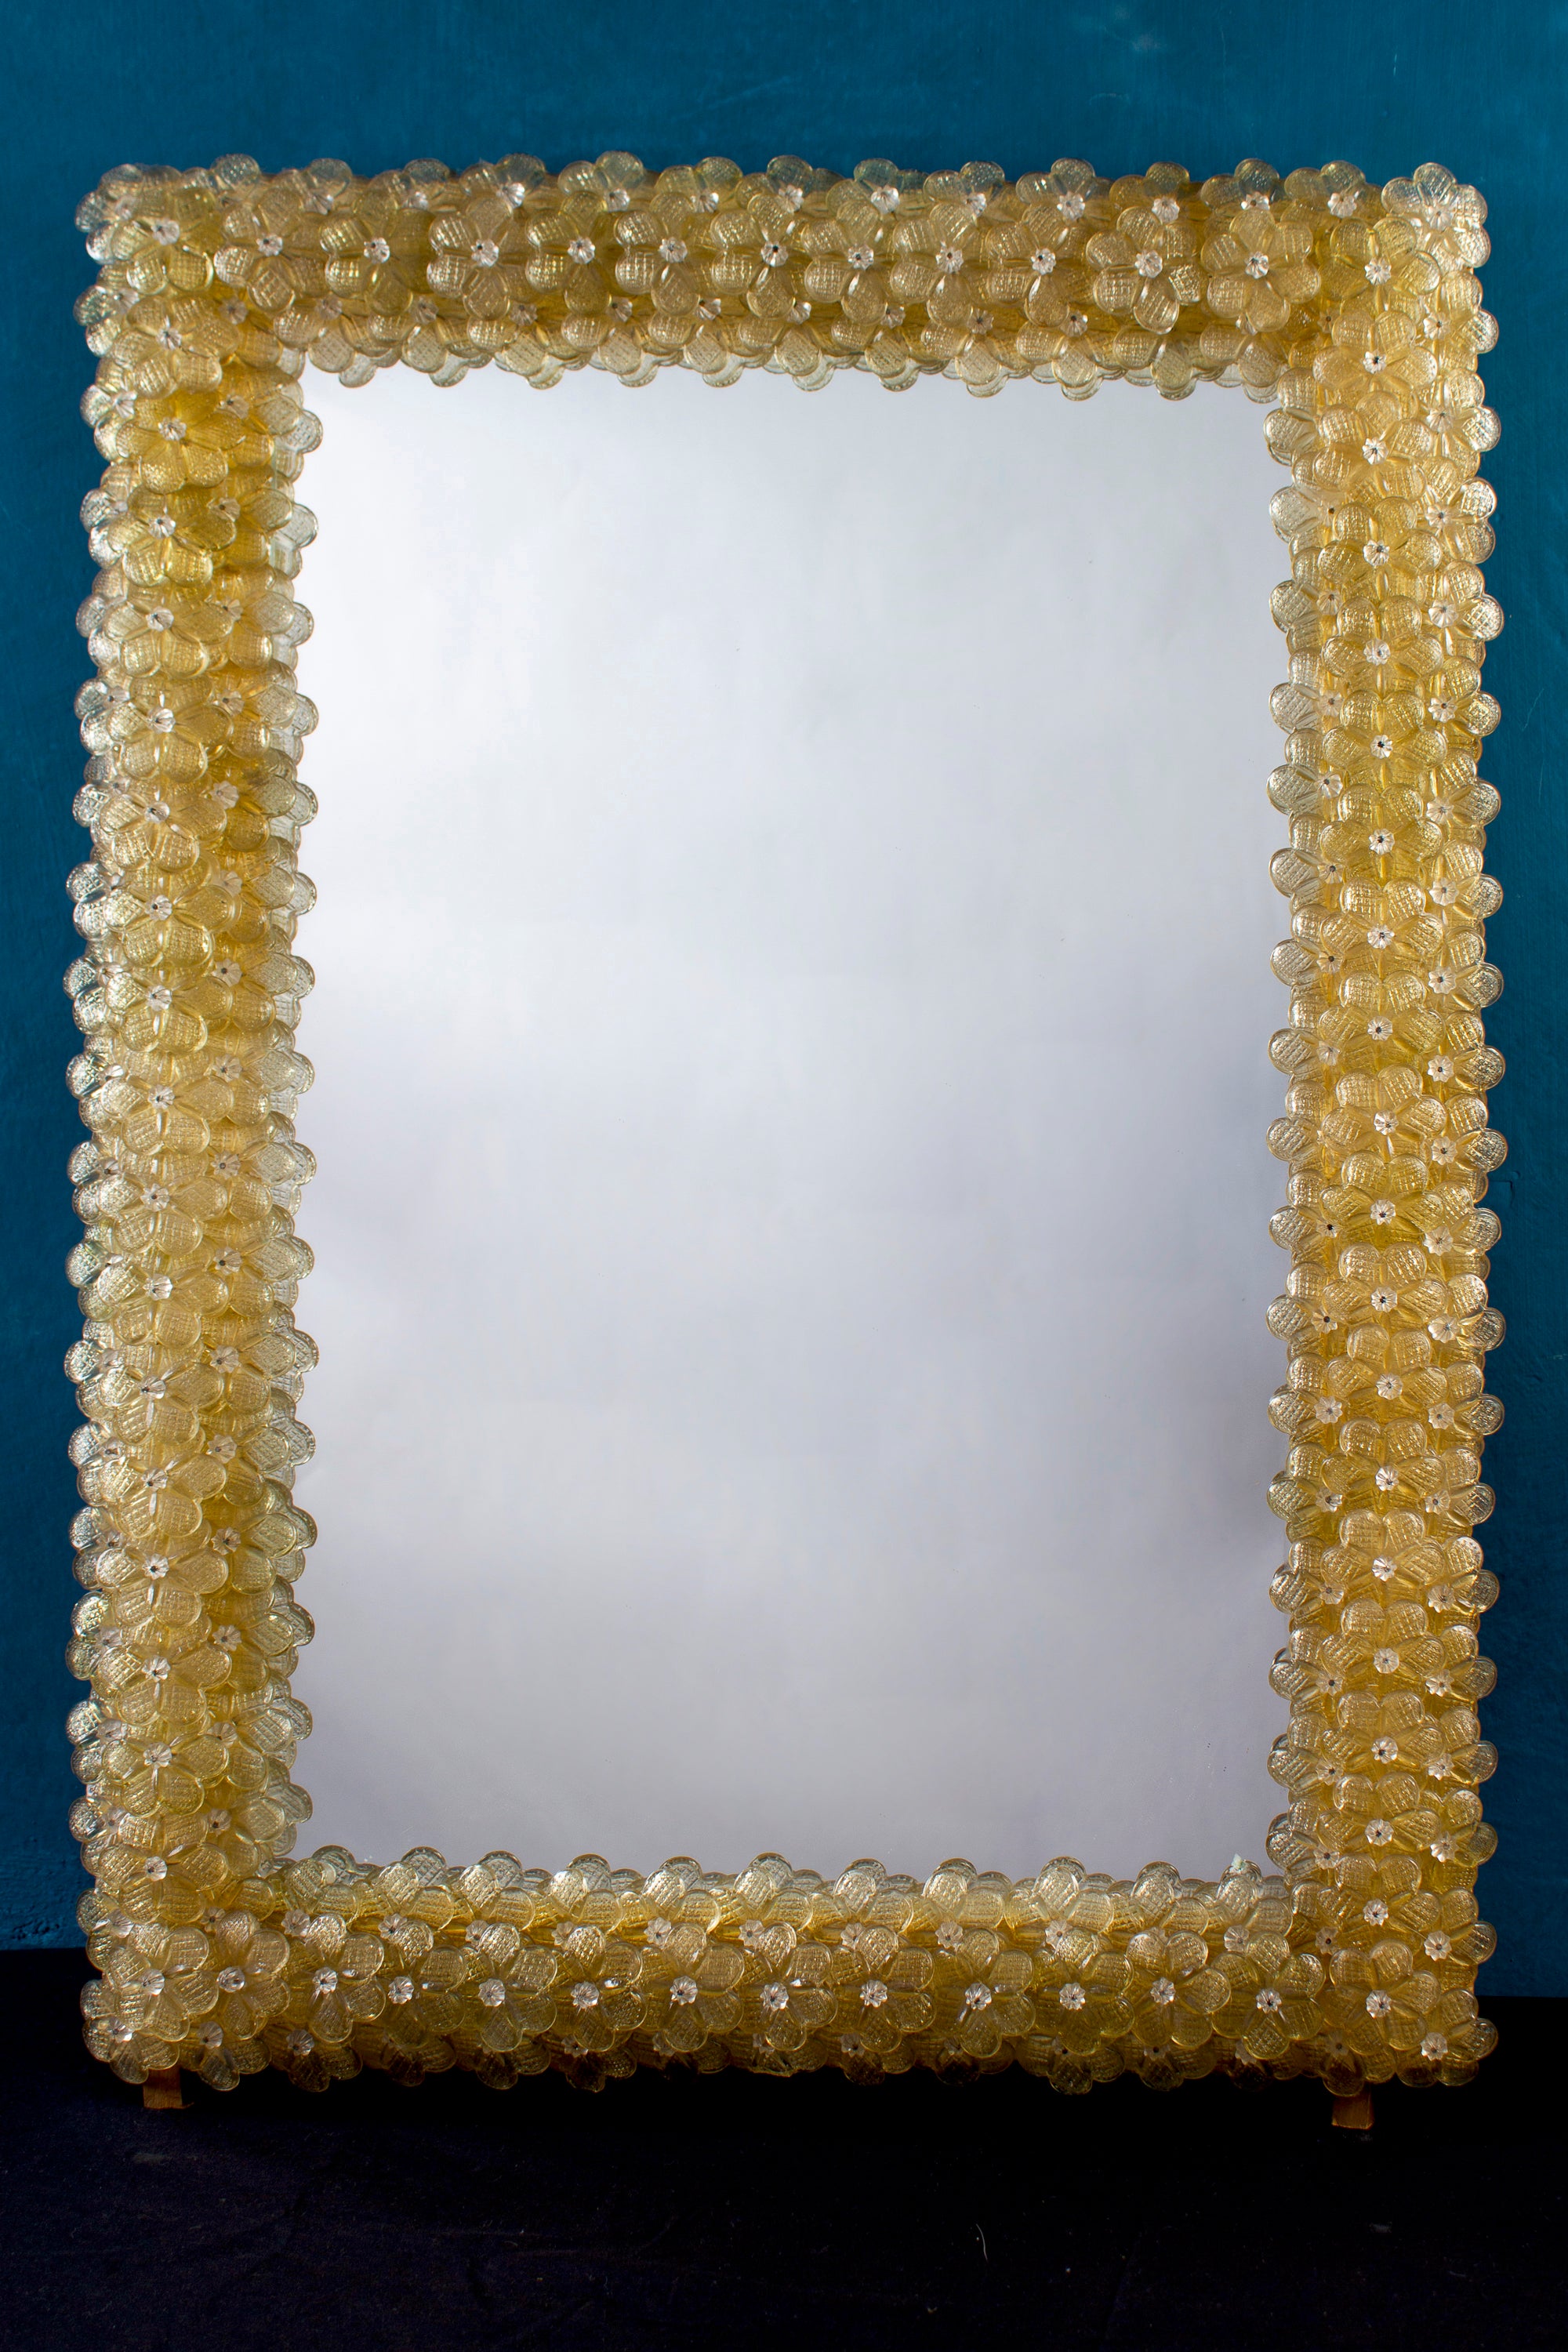 Italian Murano glass rectangular mirror with dozens of graceful hand blown gold color flowers.
Available also with acquamarine blue color the same dimension.